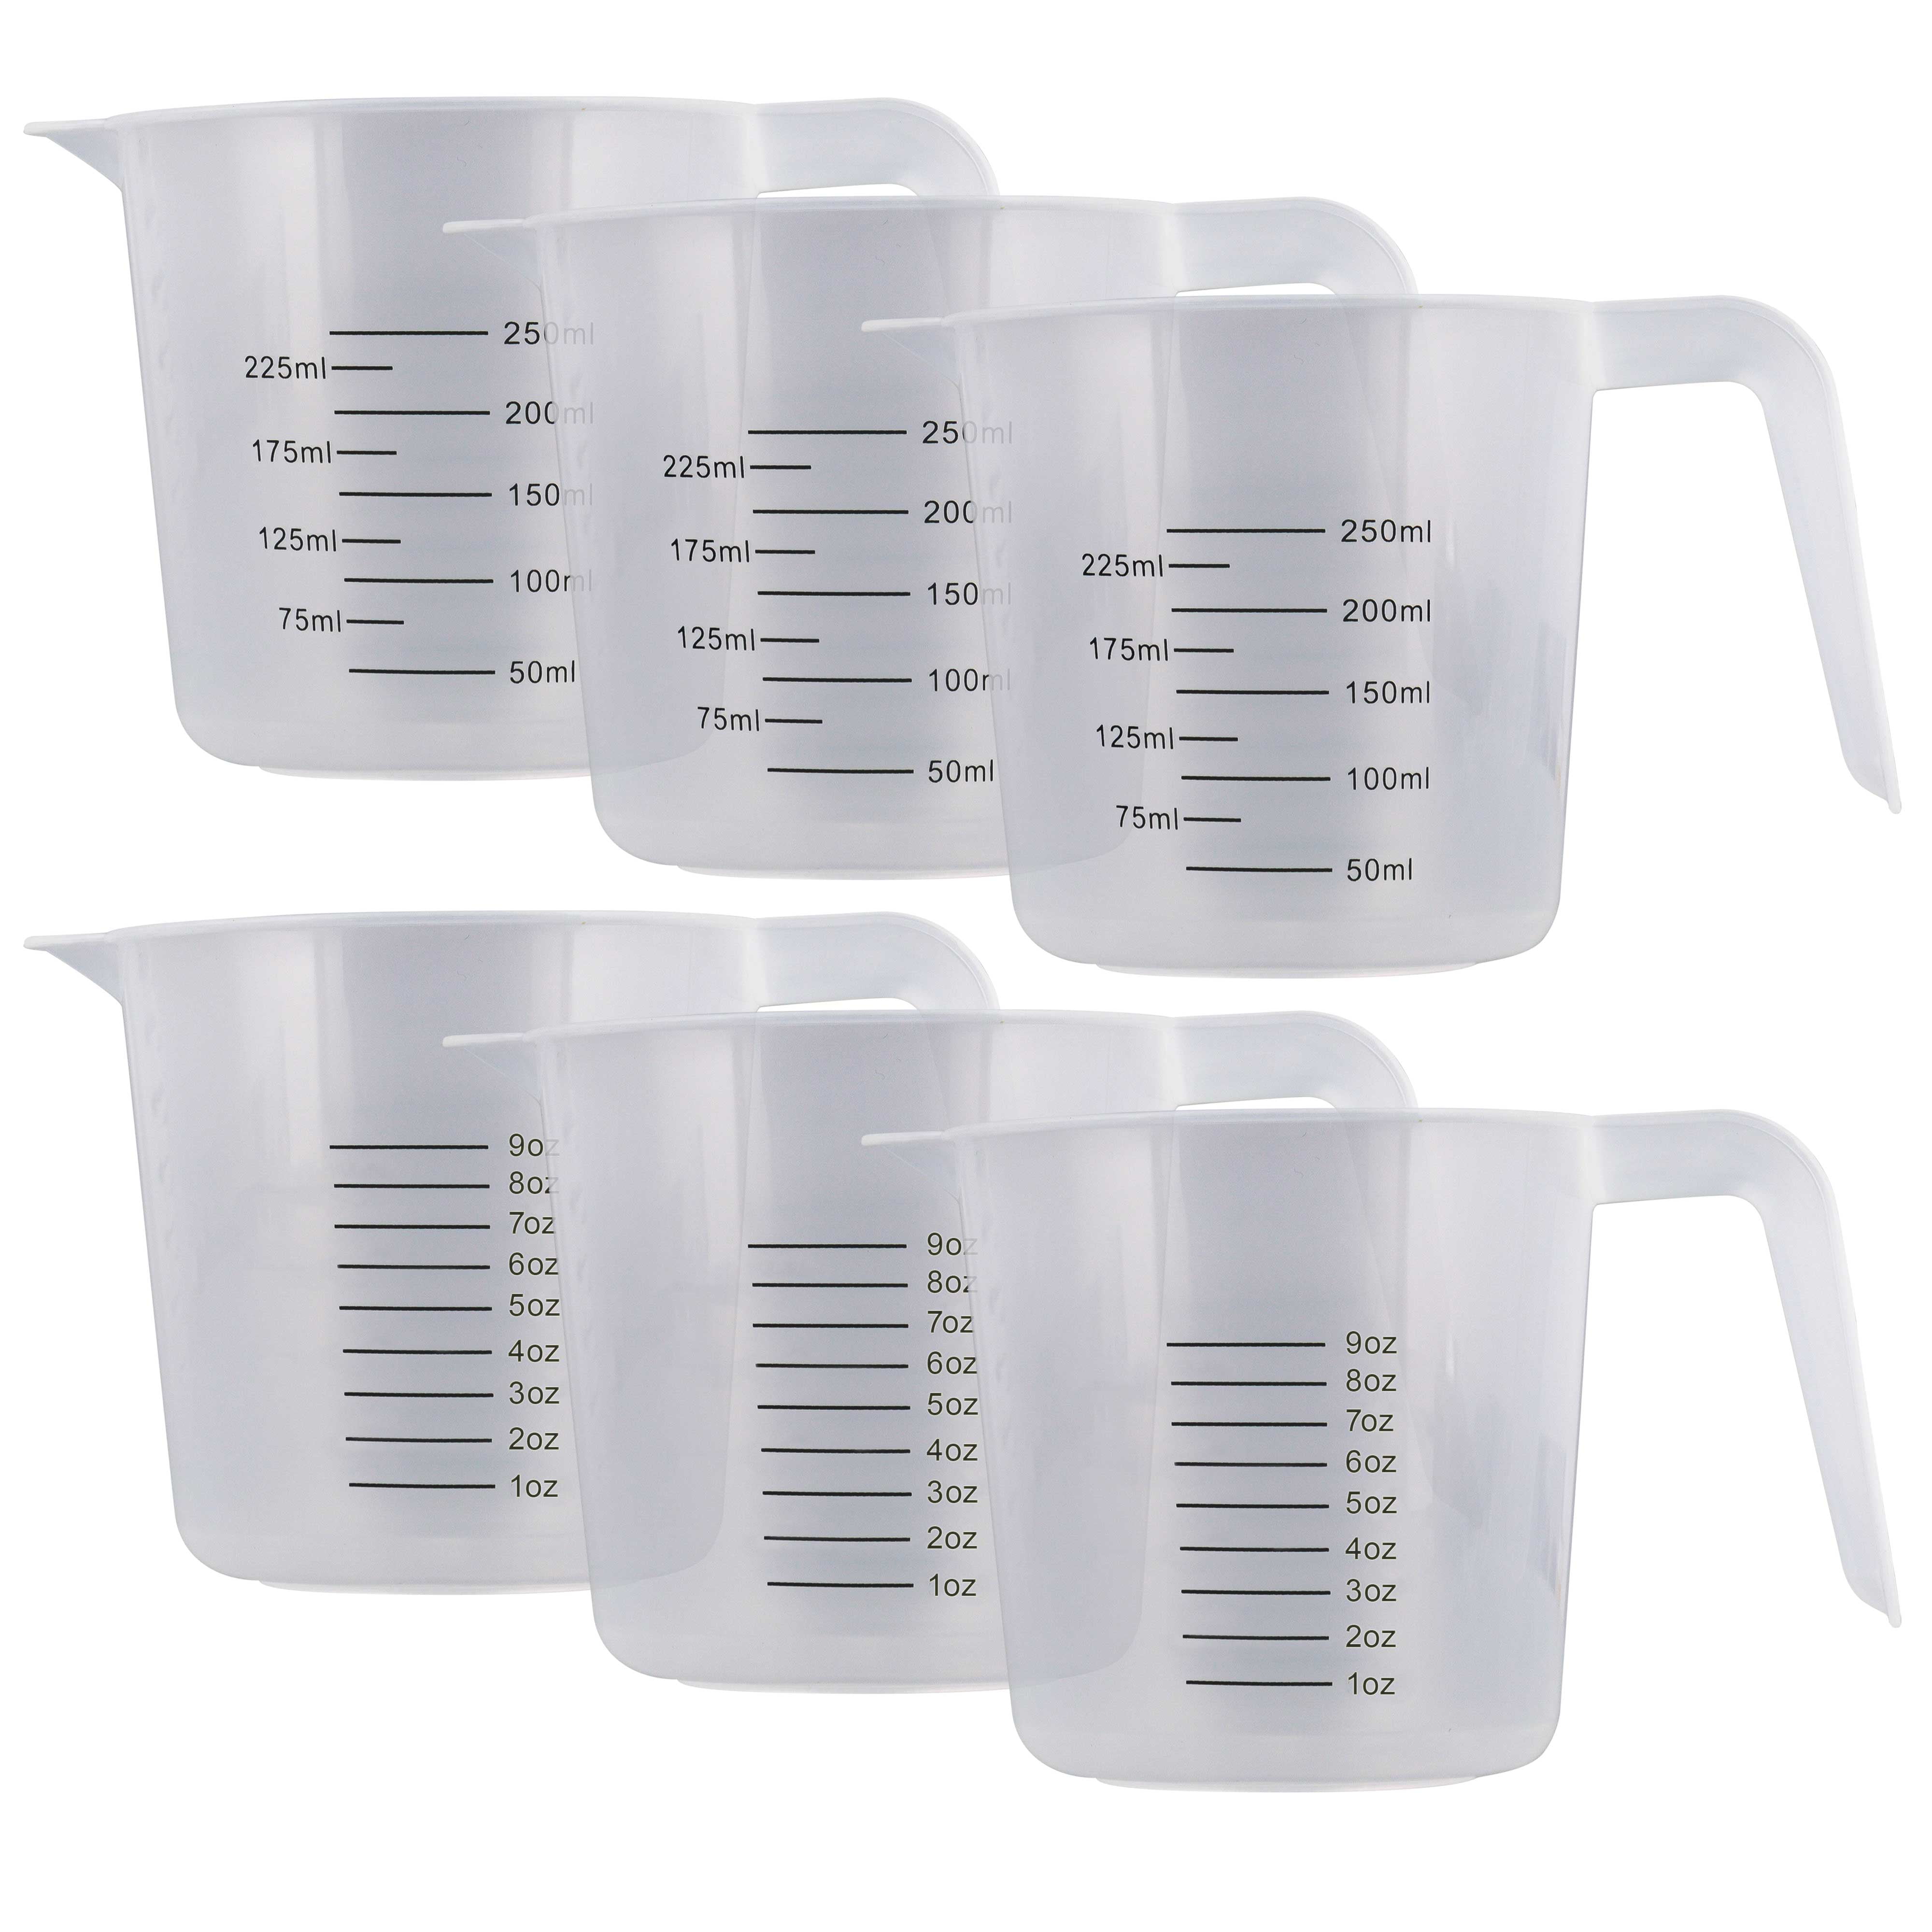 Liquid Measuring Cups 3 Pack Colorful 1-4 Cup Capacity Handles FREE SHIPPING